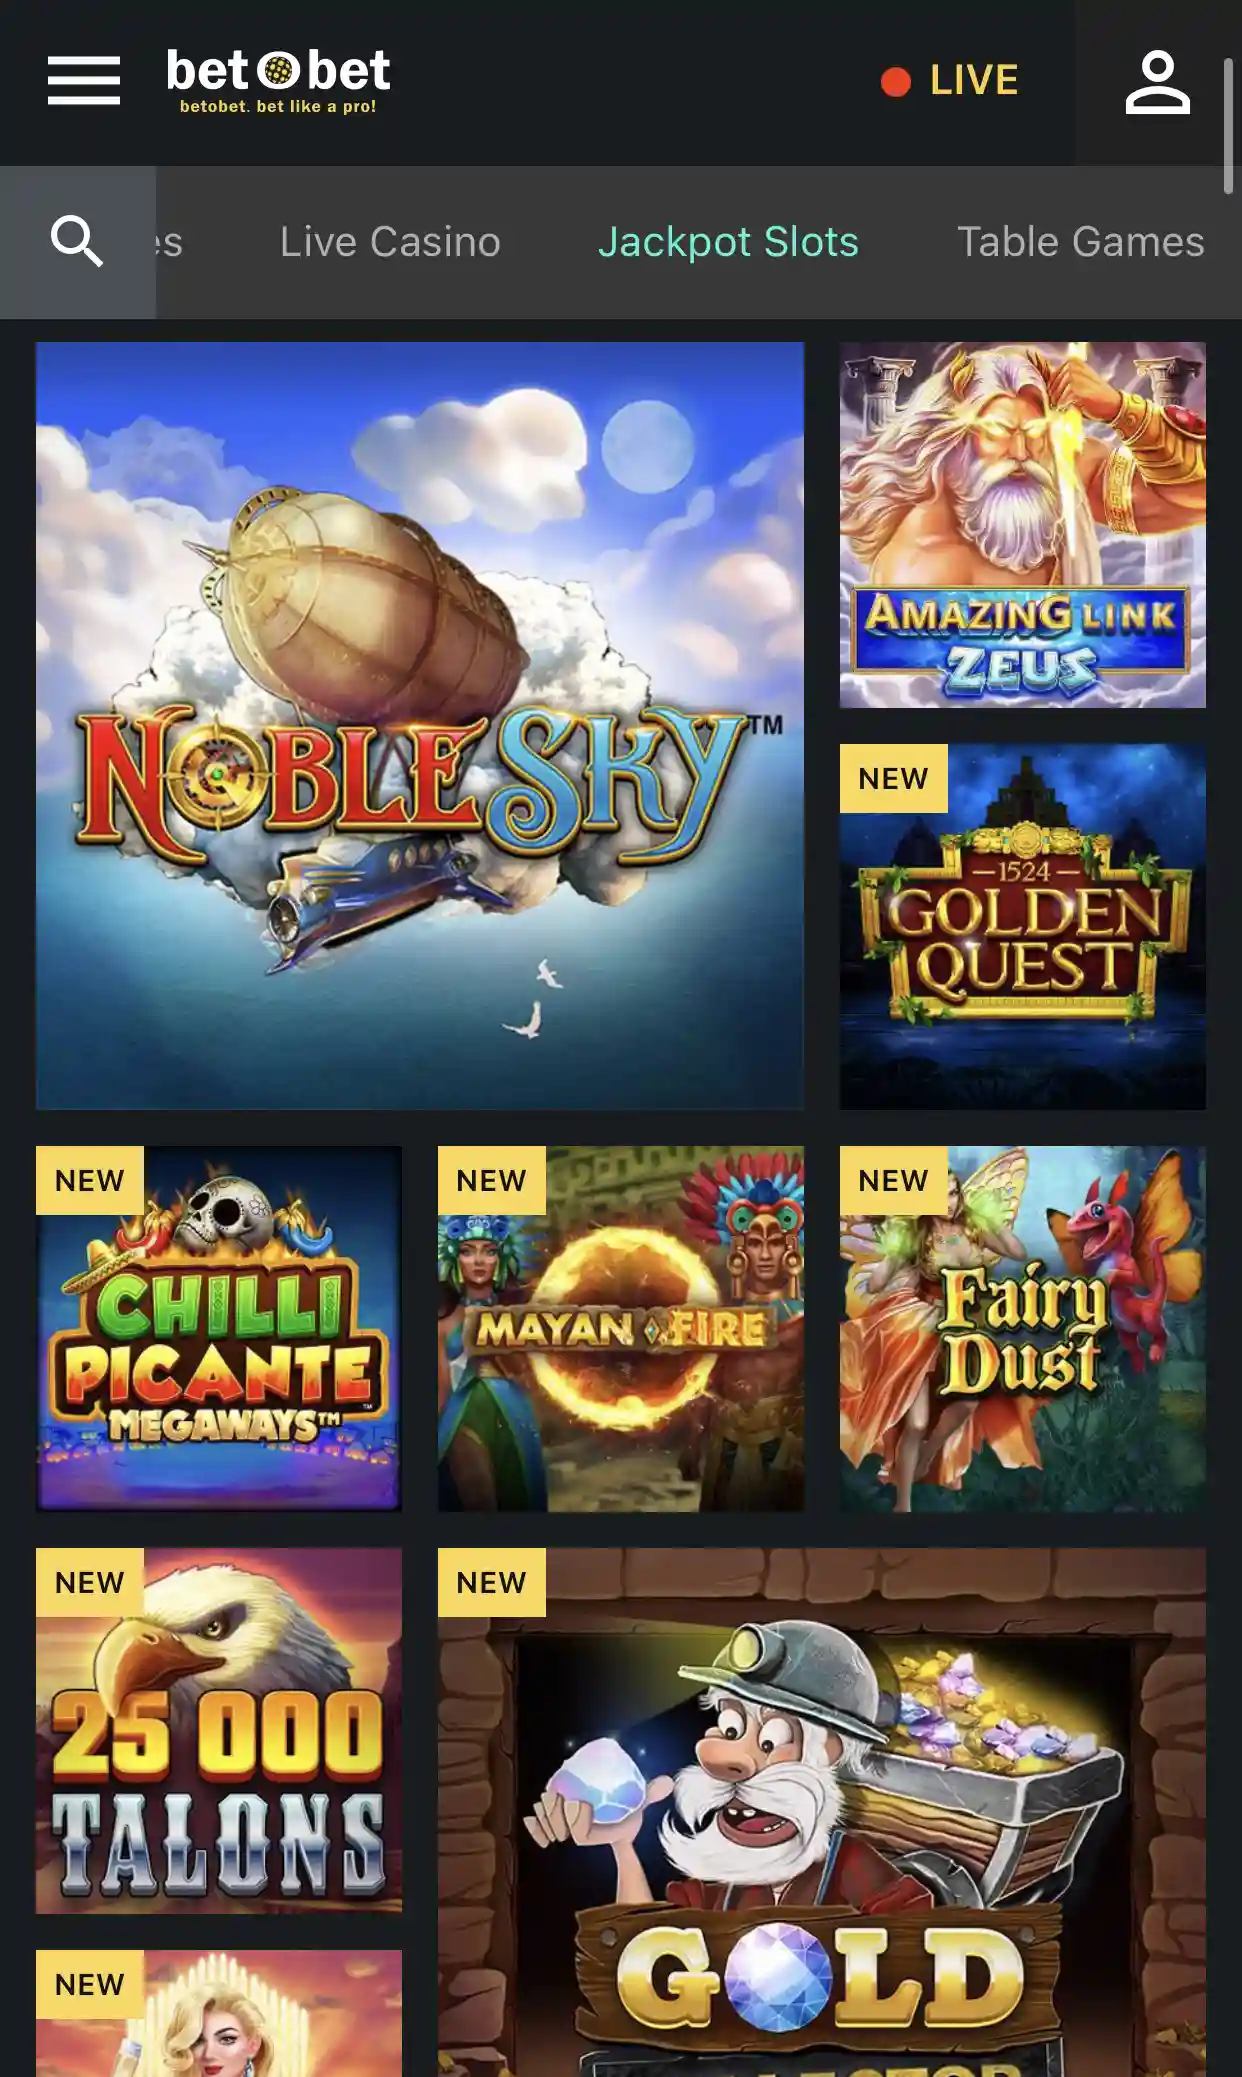 The newest and most exciting slots at Betobet Casino.